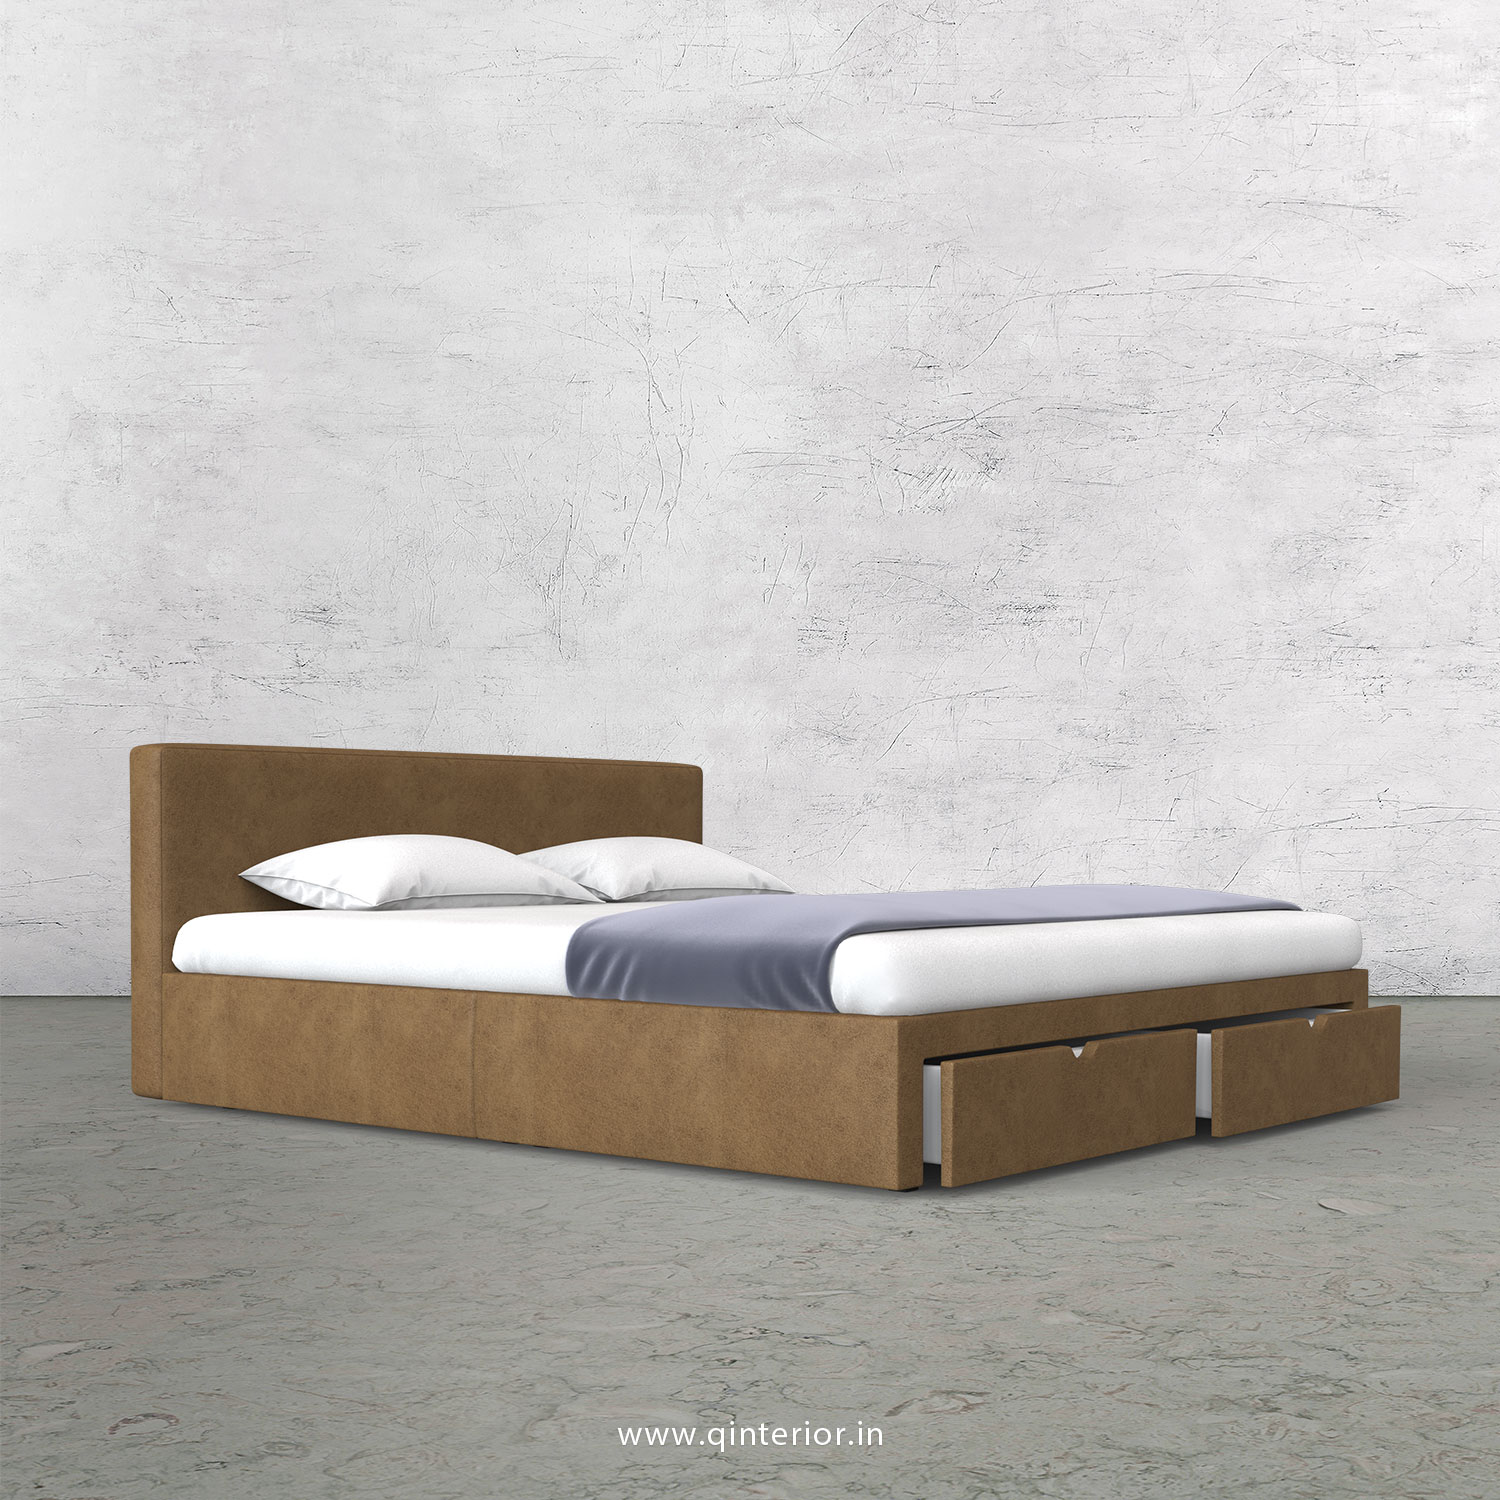 Nirvana King Size Storage Bed in Fab Leather Fabric - KBD001 FL02